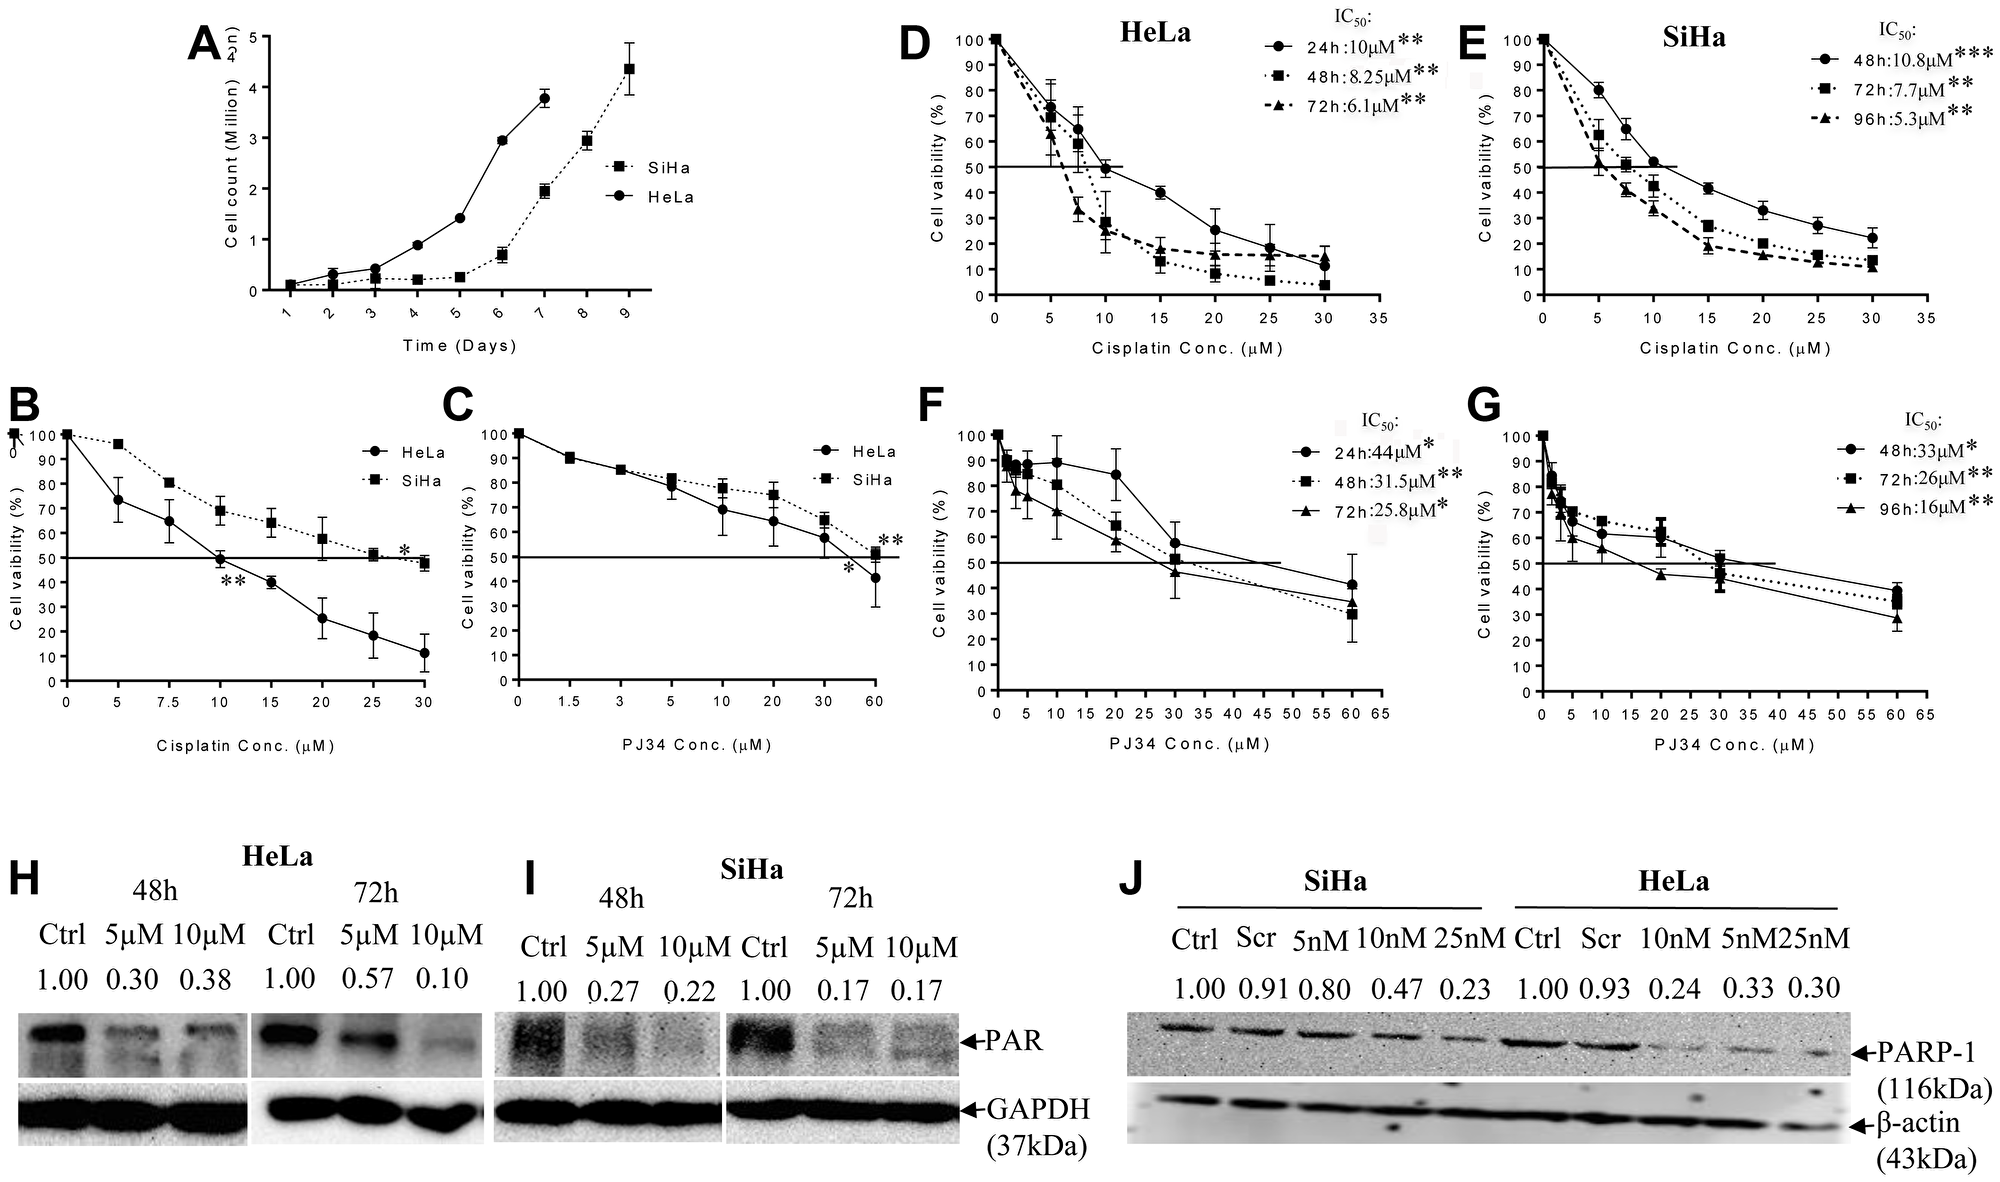 Doubling time and dose-response effect of PJ34 & CDDP on cell vaibility and representative immunoblots confirming PARP-1 inhibition.